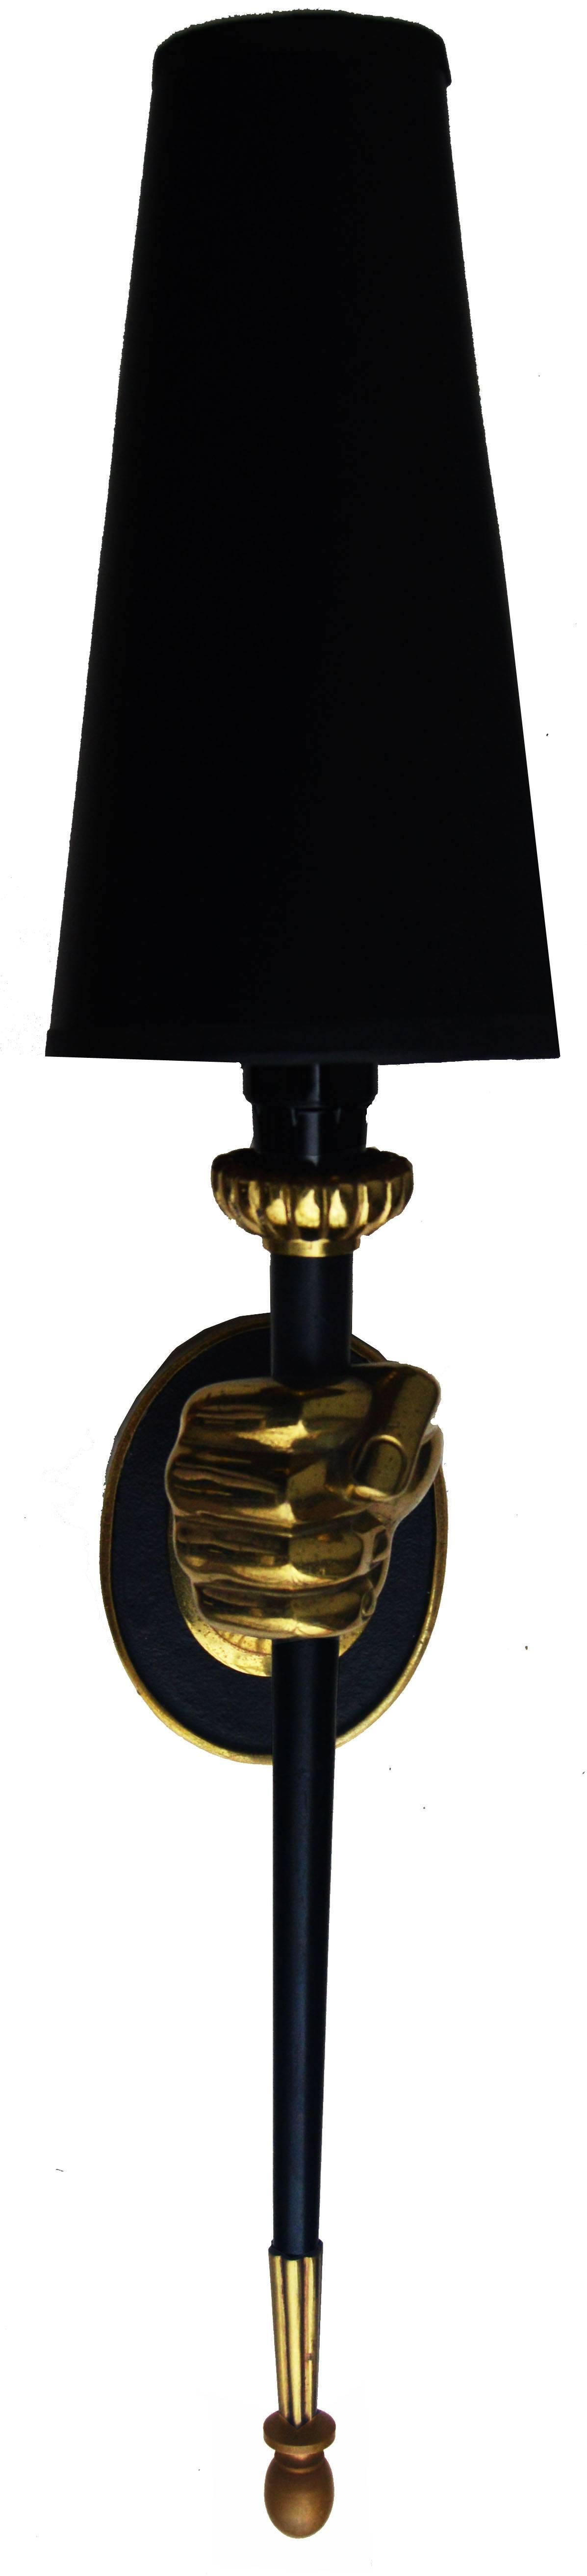 Impressive pair of sconces by Maison Jansen figuring a bronze hand holding a
black lacquered torch.
One light, 60 watts max.
US rewired.

Dimension without shade: 13 H, 3 1/4 W, 6 Projection.
Backplate: 4.5 H , 3 1/4 W.